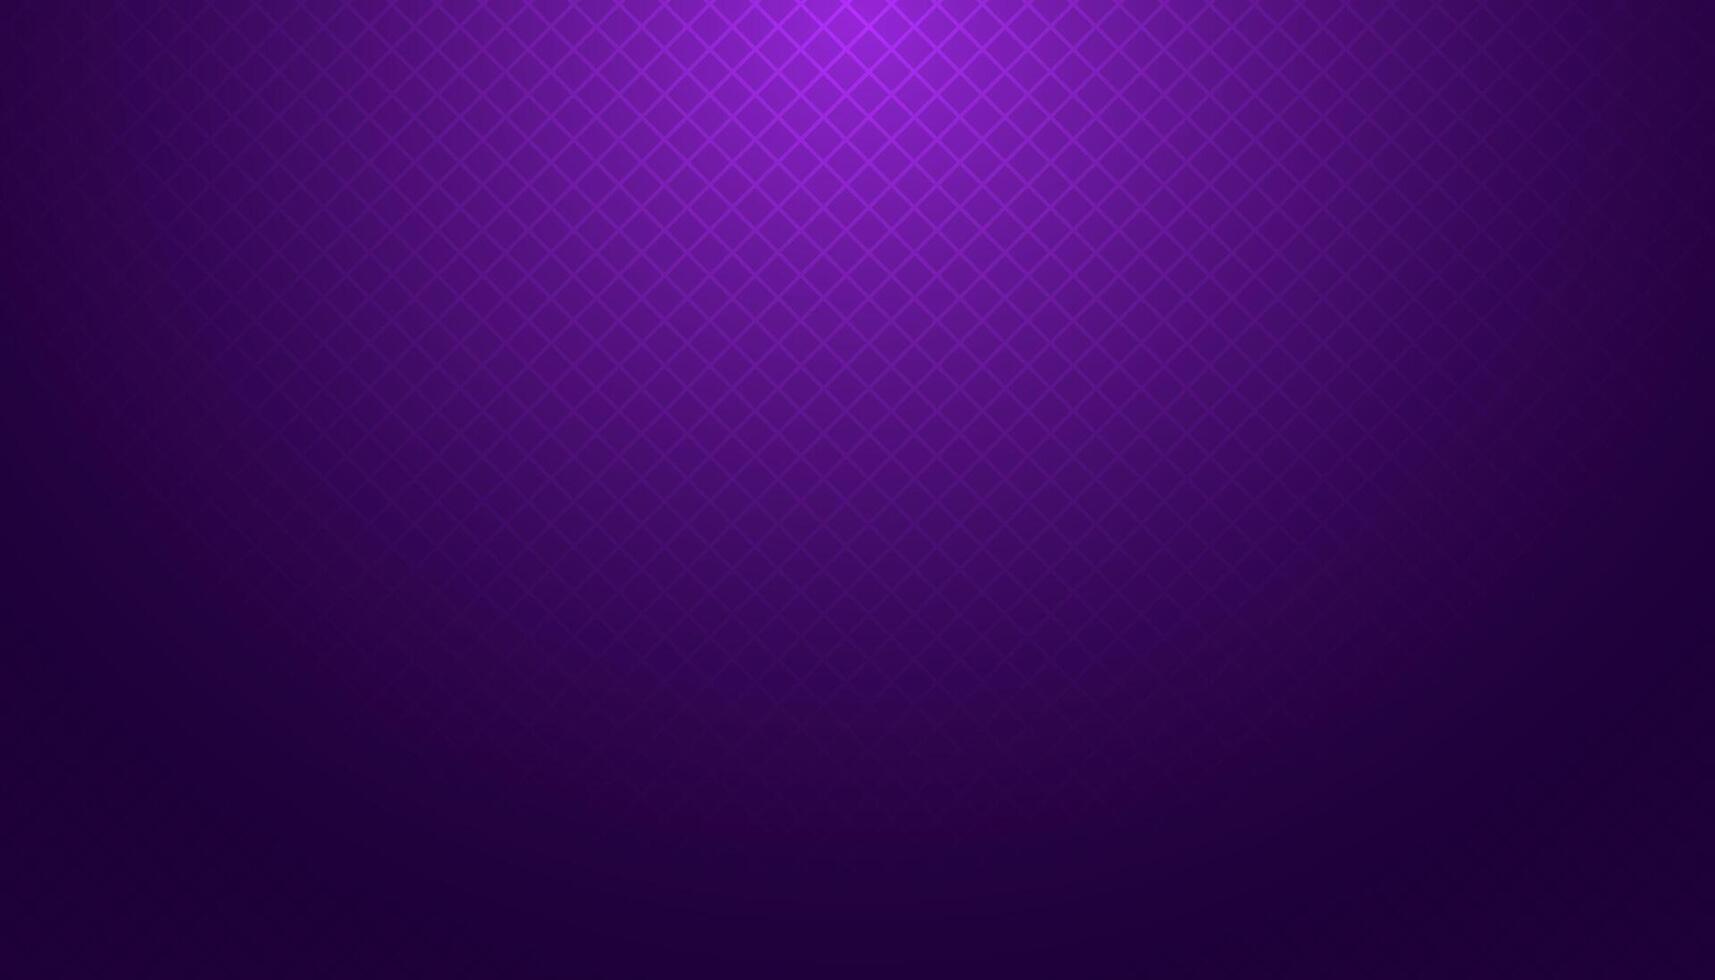 Abstract dark purple background with grid lines pattern. Eps10 vector